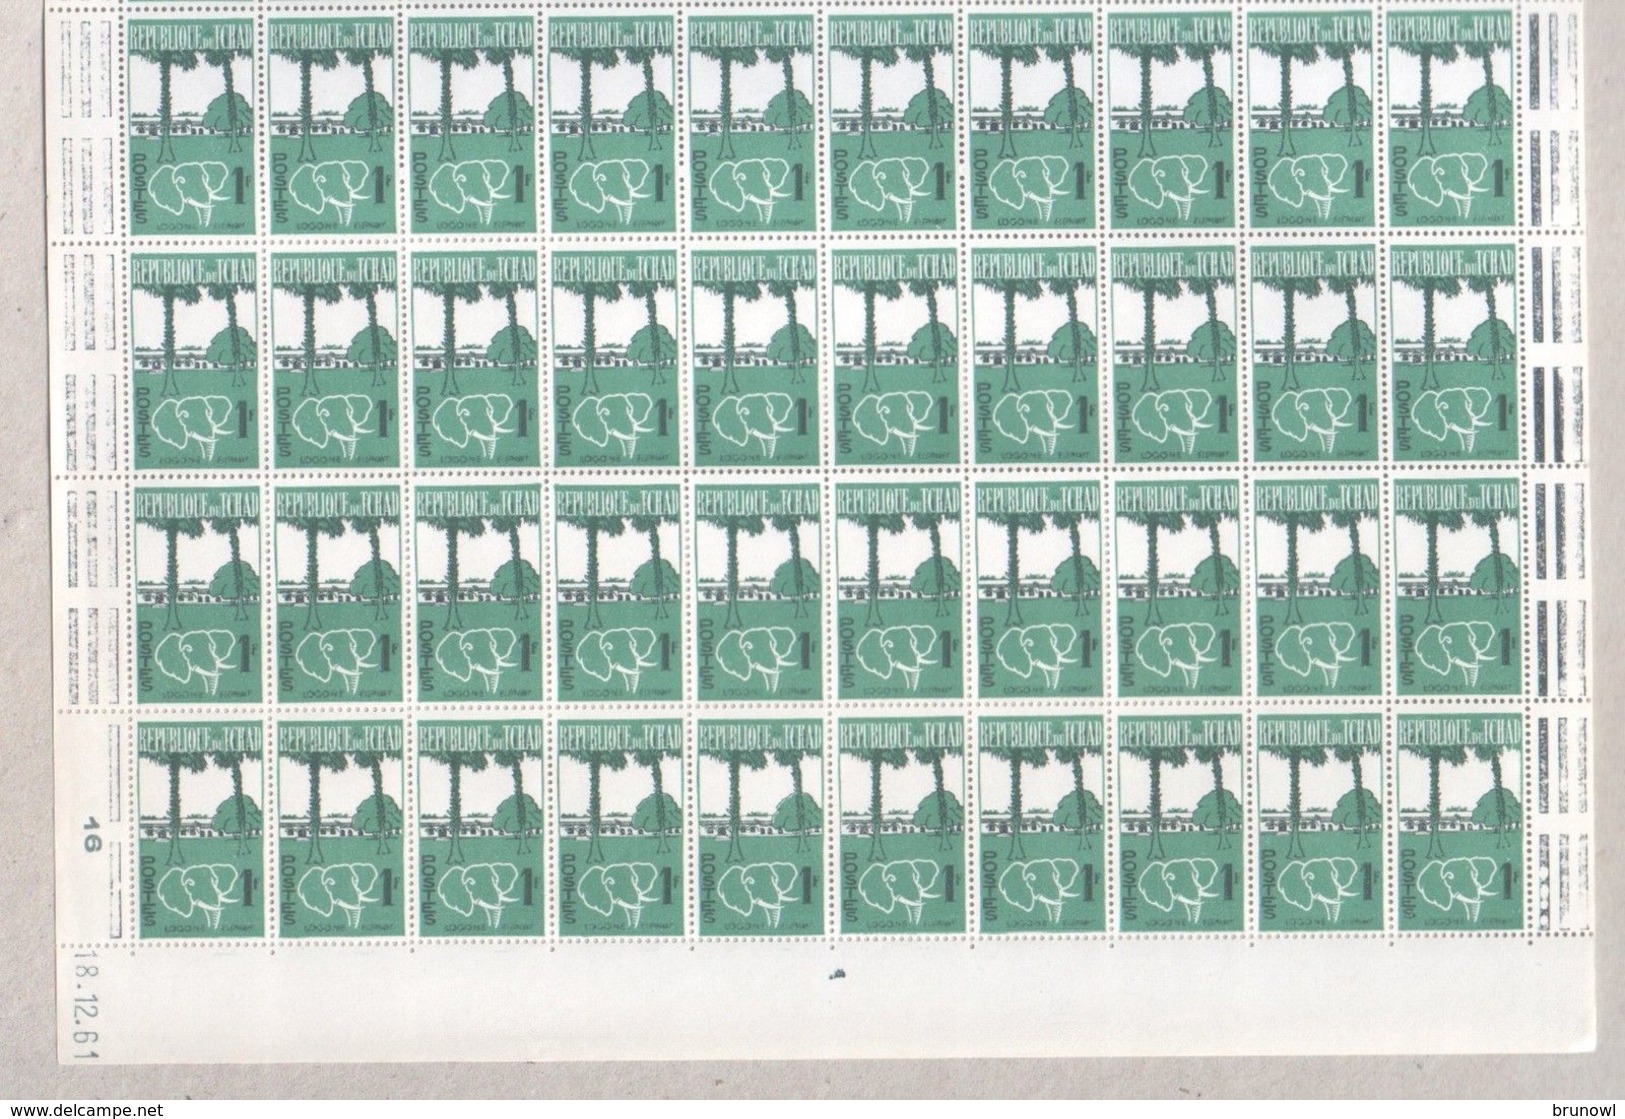 Chad MNH Sheet Of 1962 1F Elephant And Lagoon Stamps - Chad (1960-...)